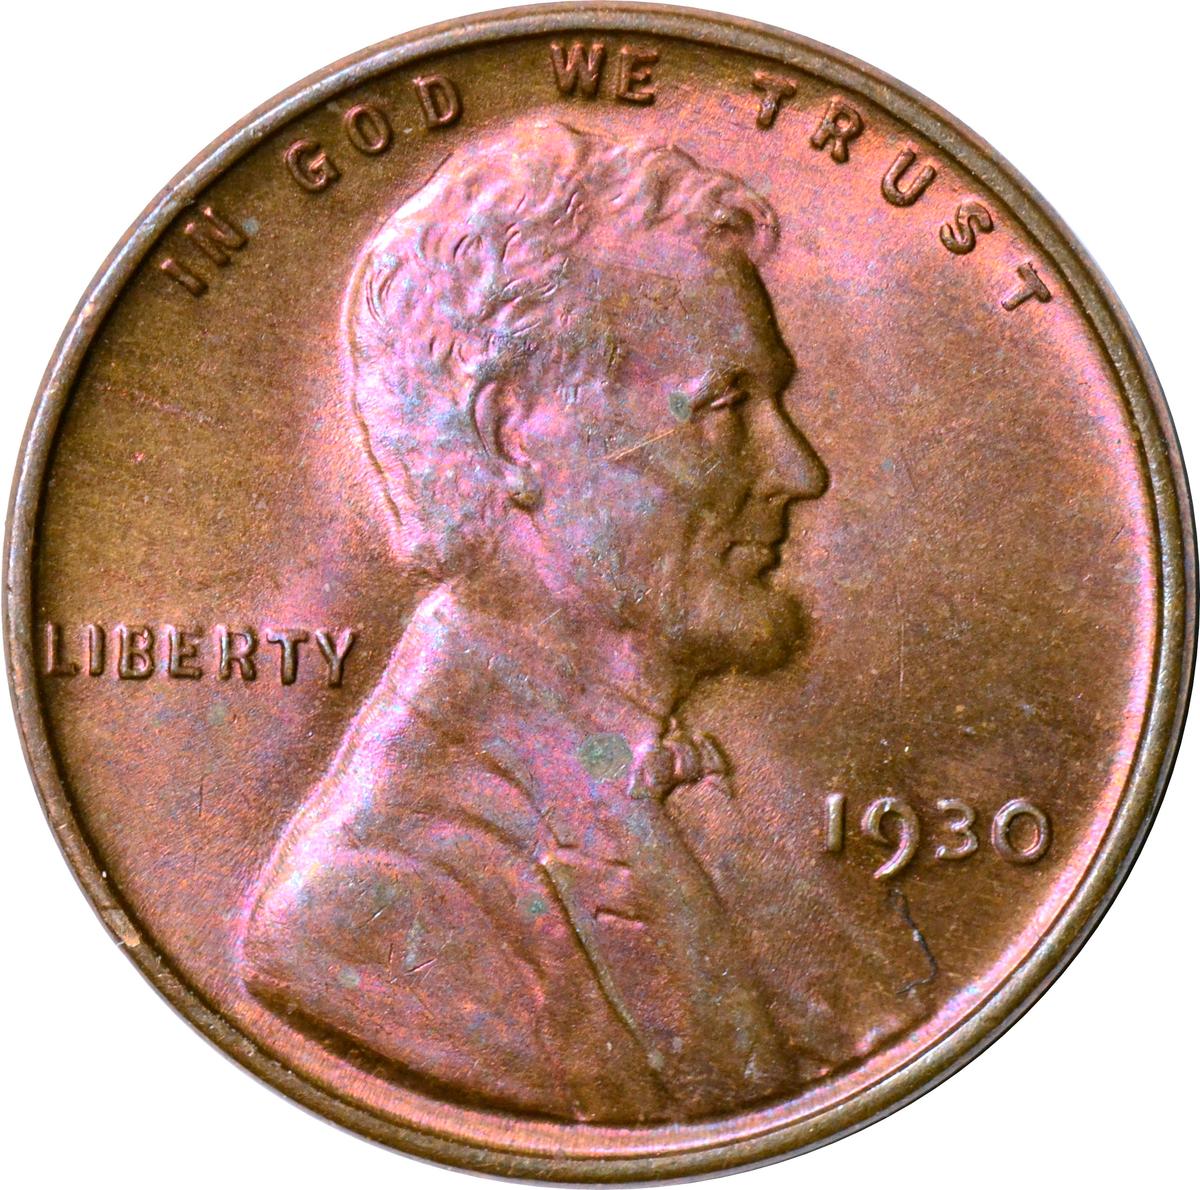 1930 LINCOLN CENT - TONED